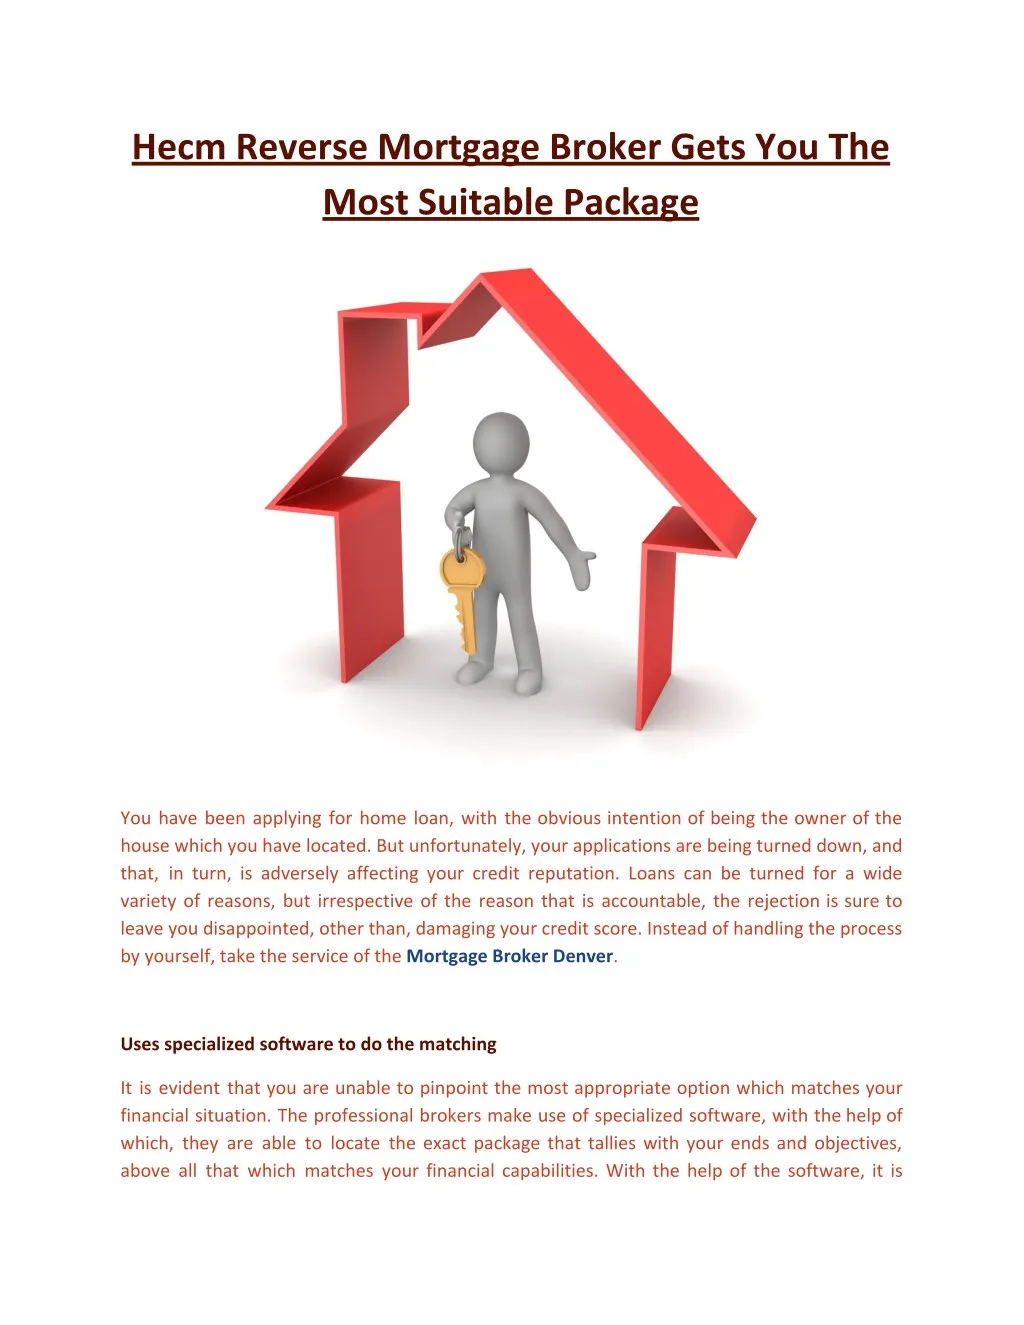 hecm reverse mortgage broker gets you the most